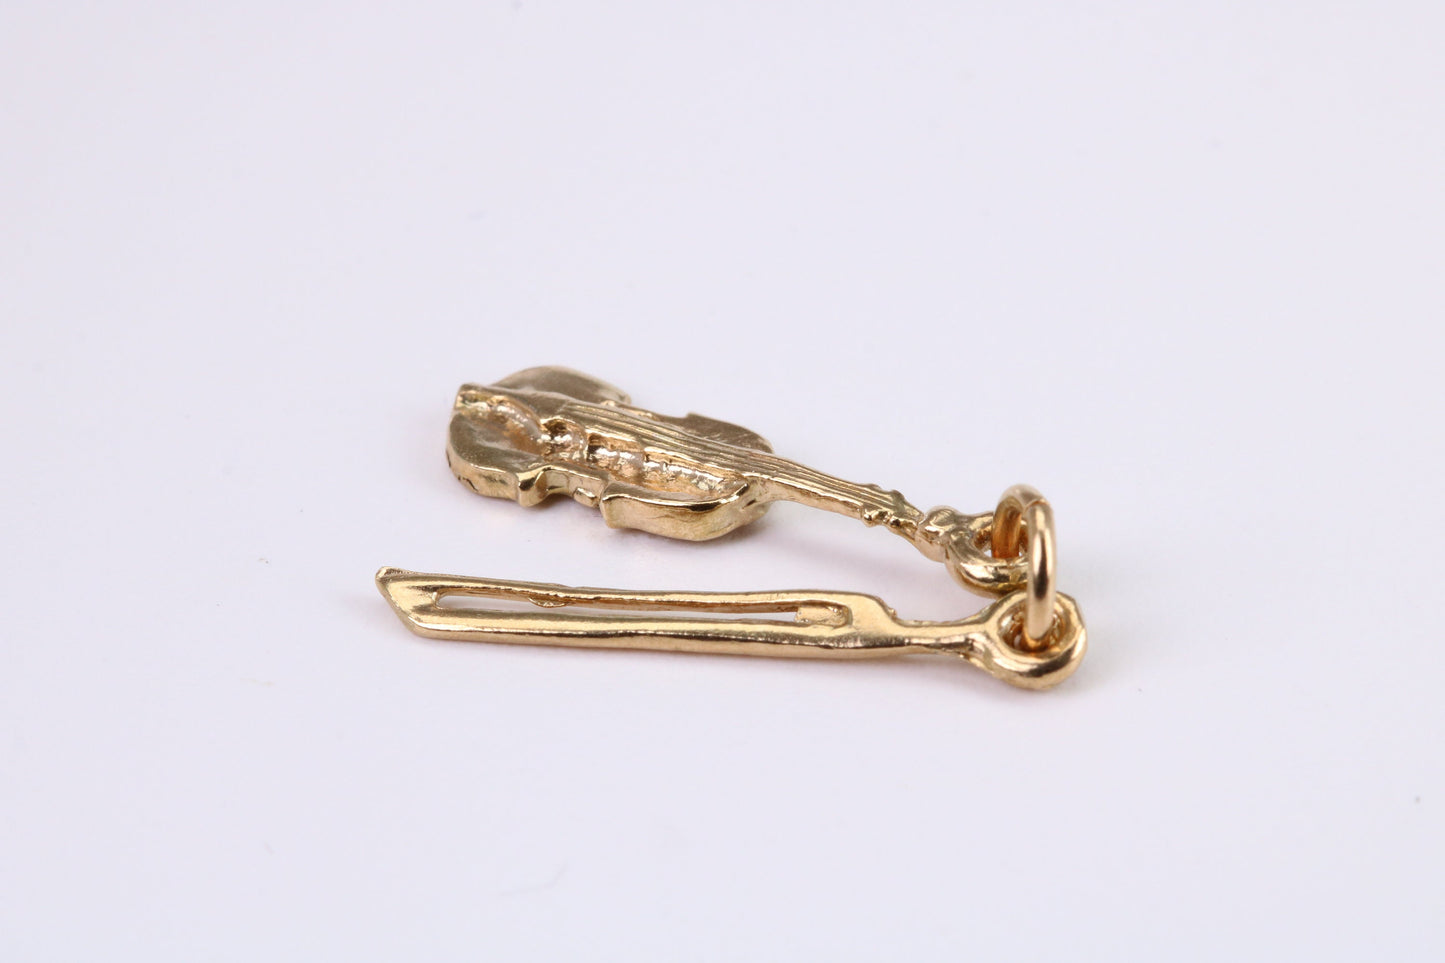 Violin Charm, Traditional Charm, Solid Yellow Gold, British Hallmarked, Complete with Attachment Link